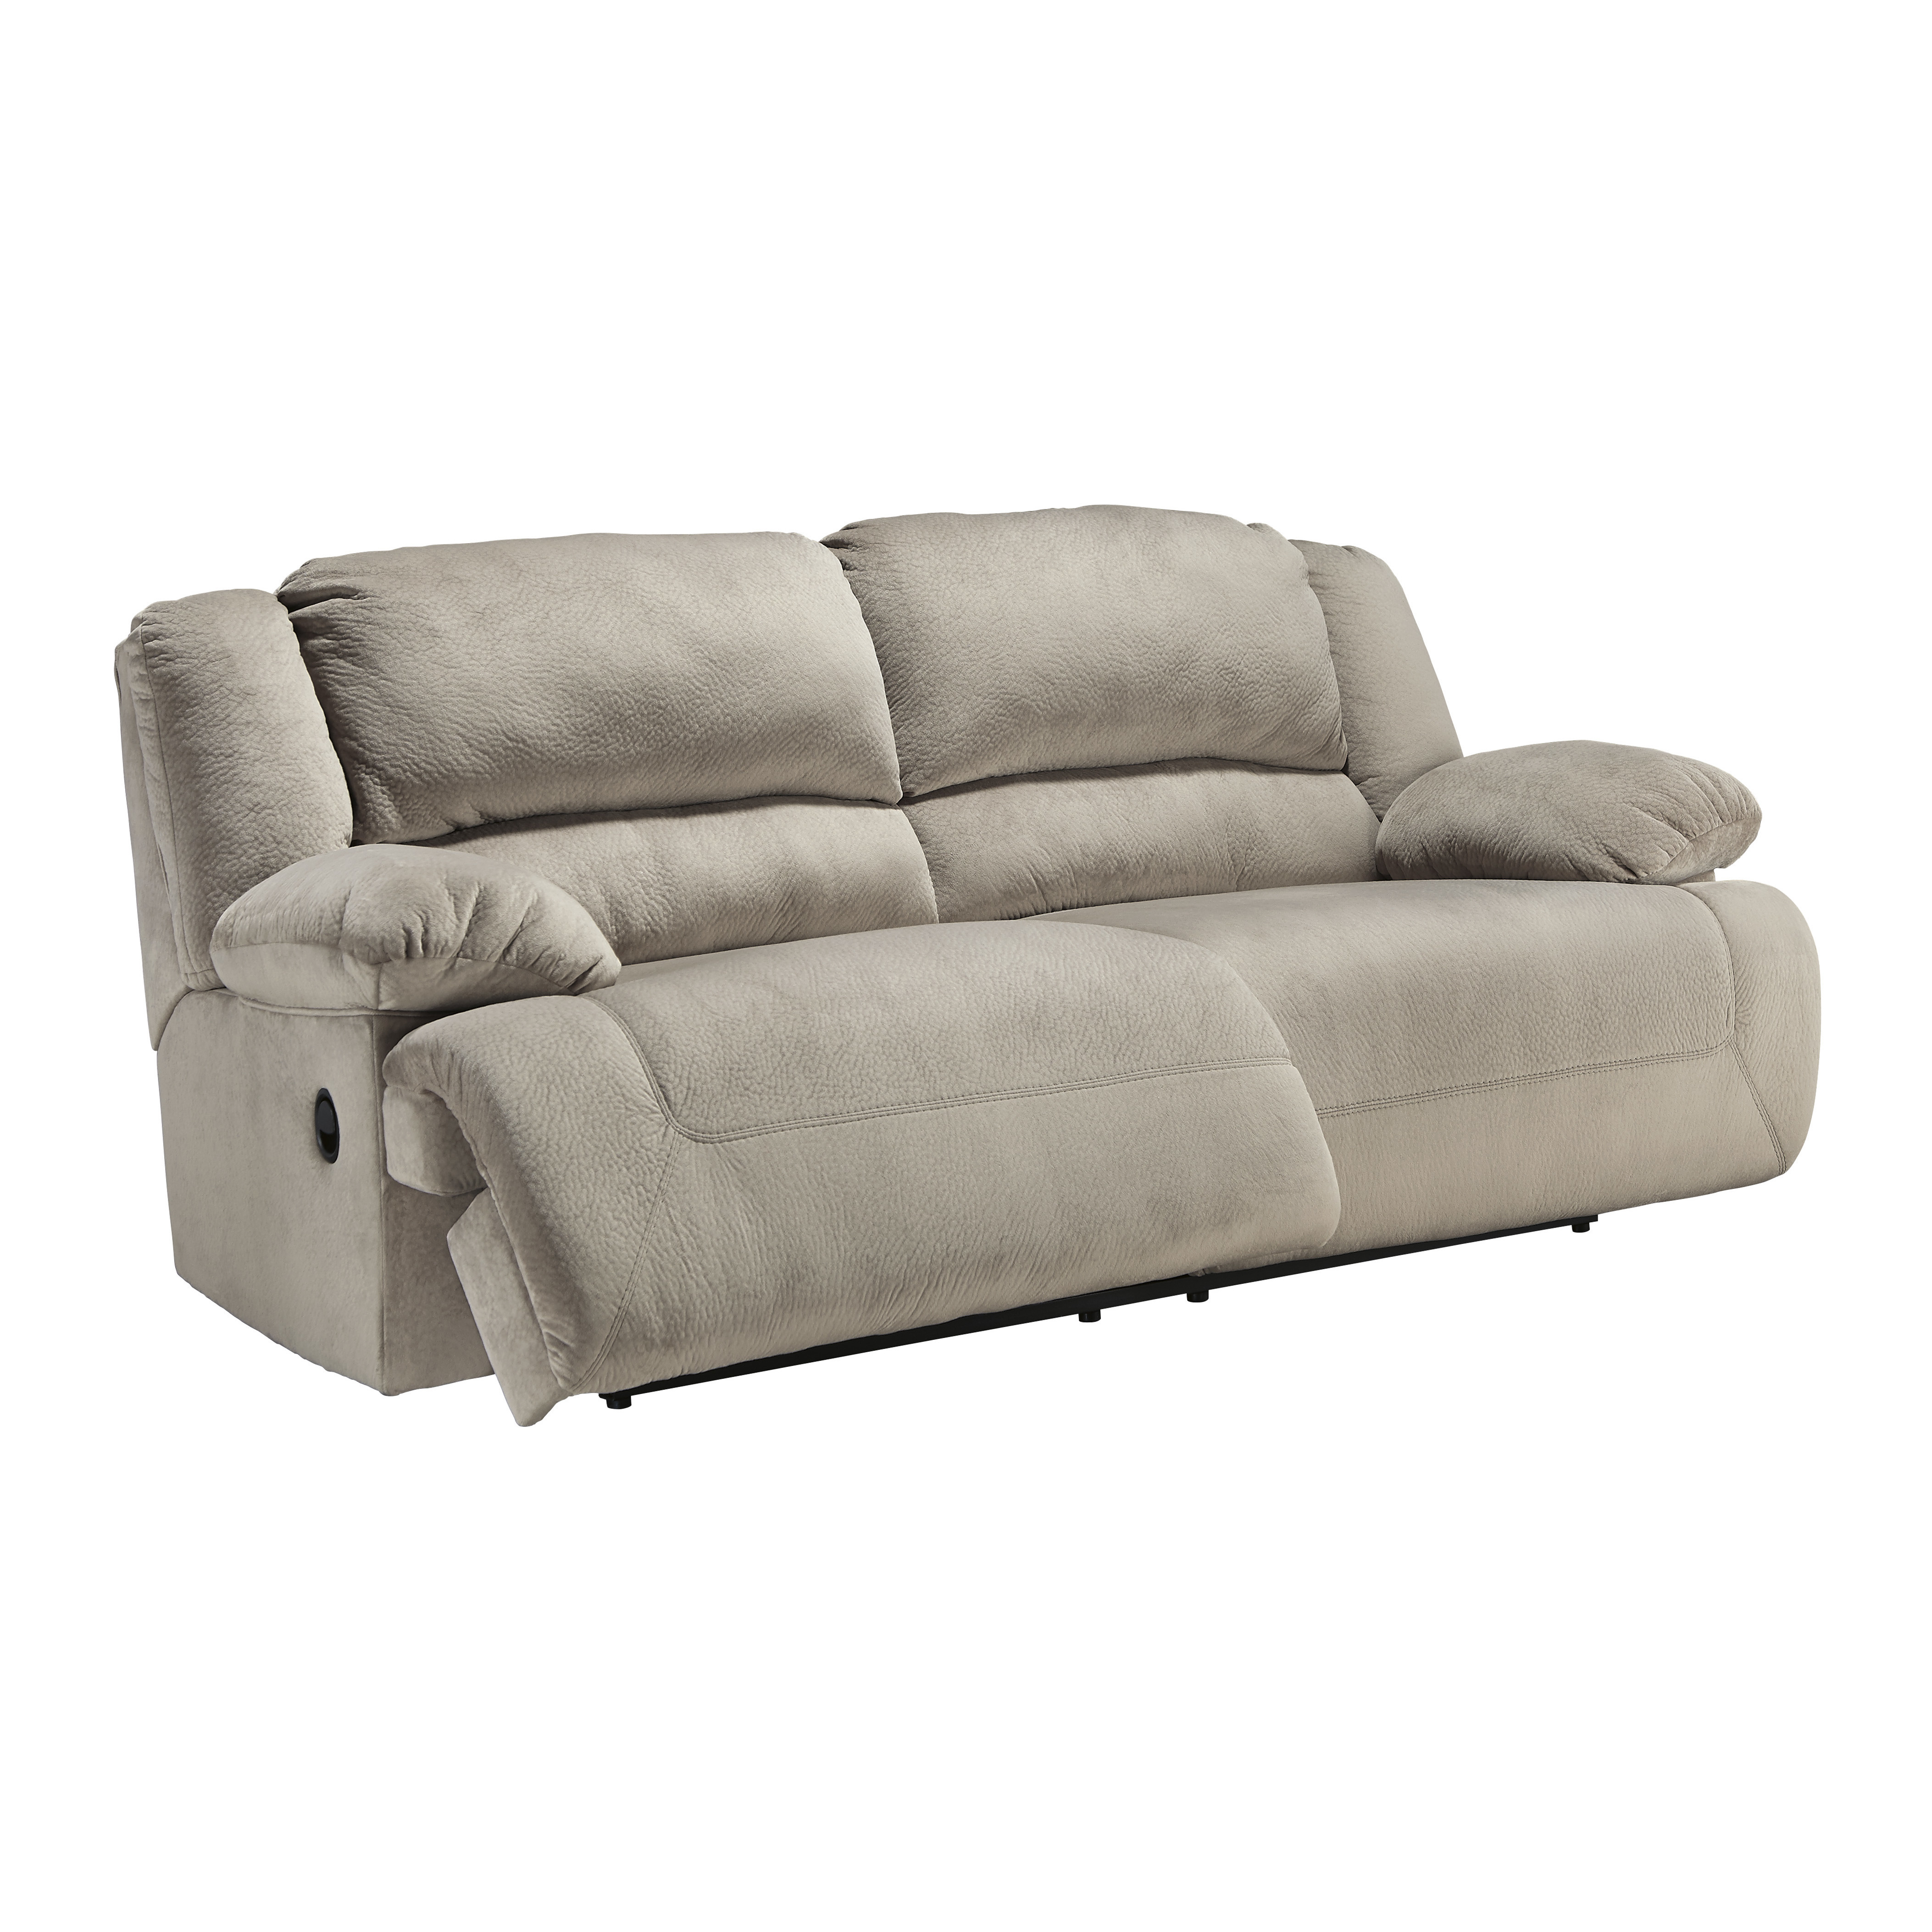 Best ideas about 2 Seat Reclining Sofa
. Save or Pin Signature Design by Ashley Tolette 2 Seat Reclining Sofa Now.